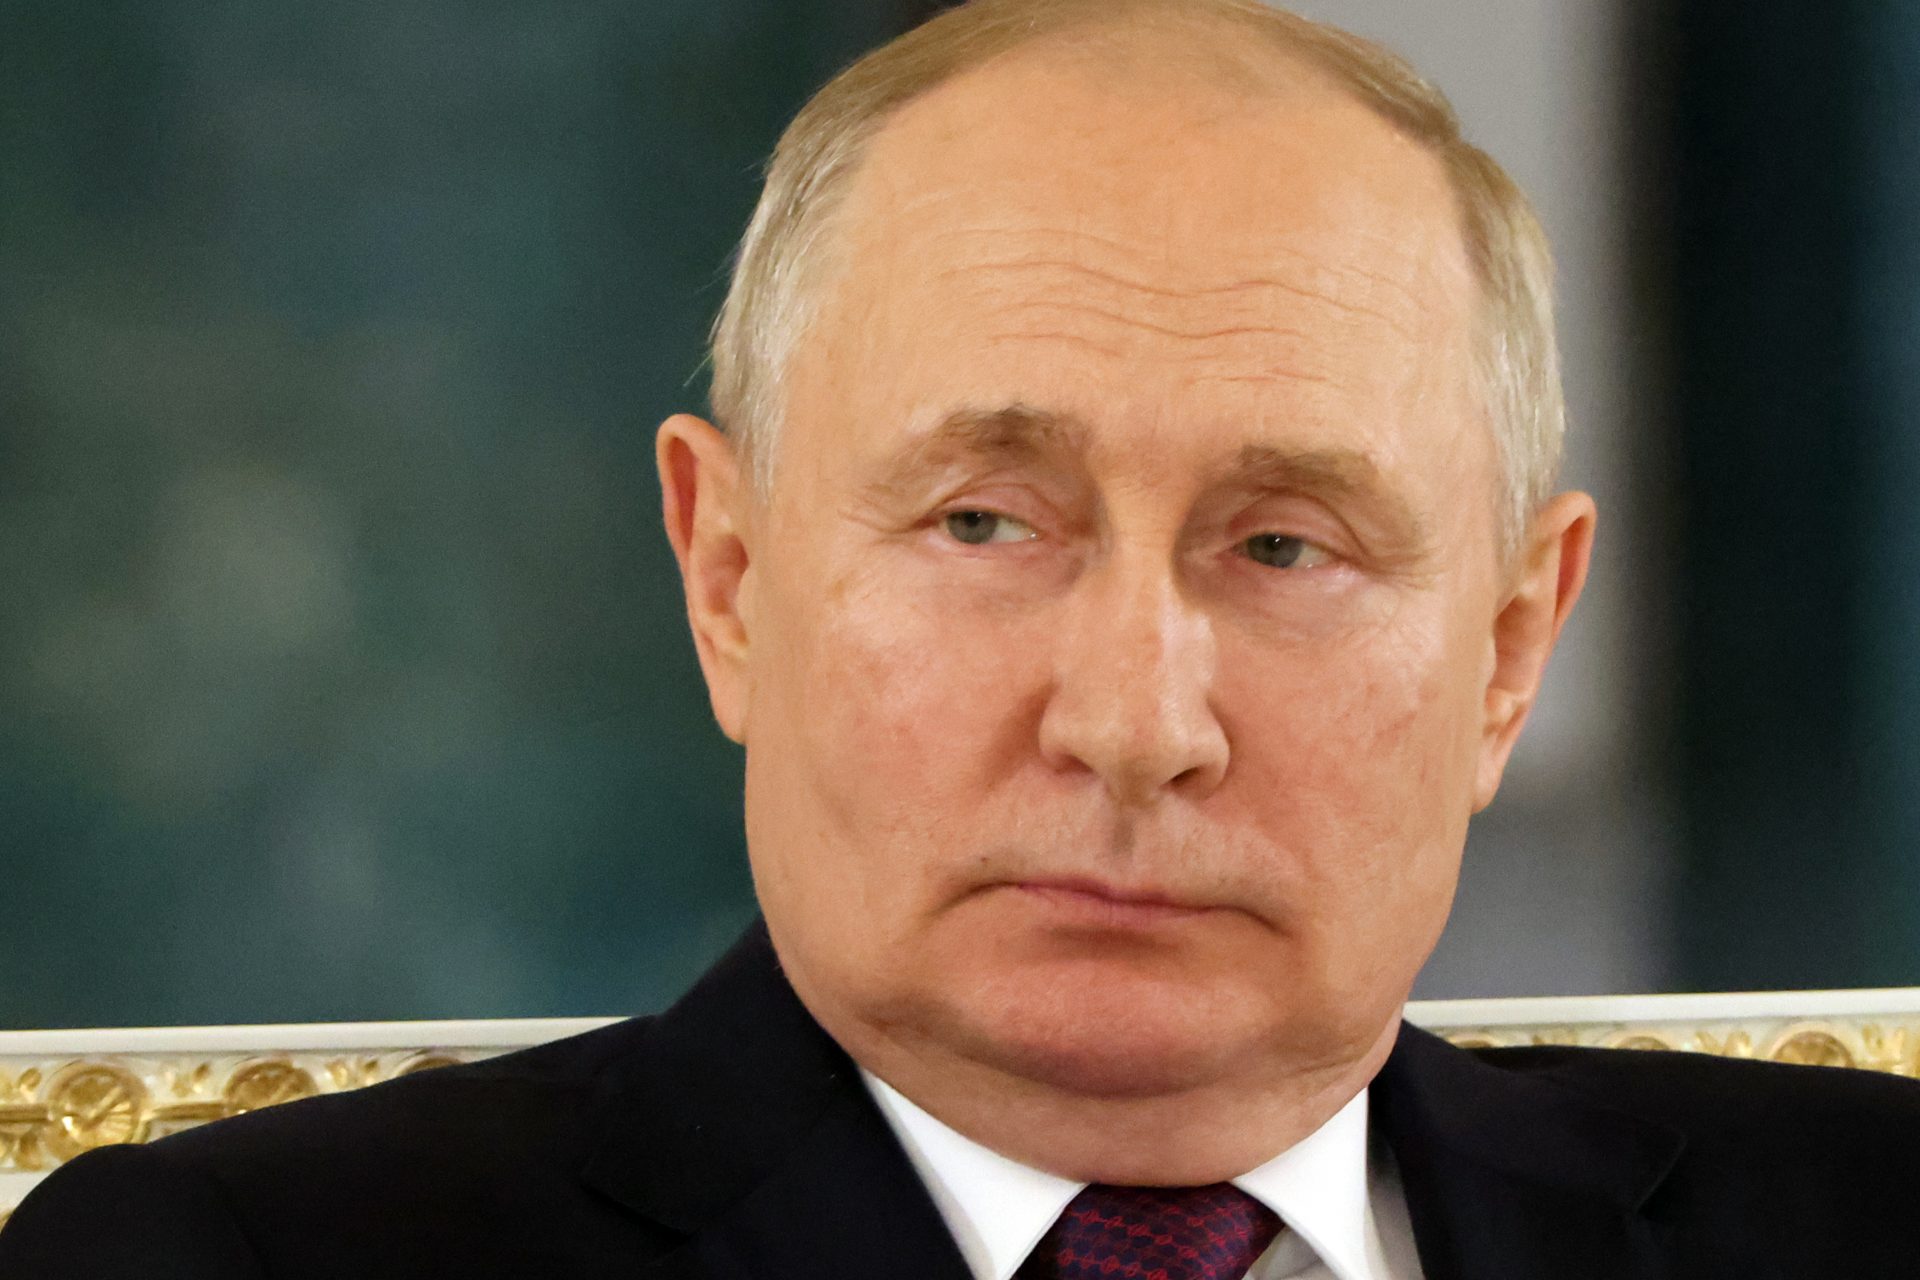 Is Putin hoping he can outlast Western support?